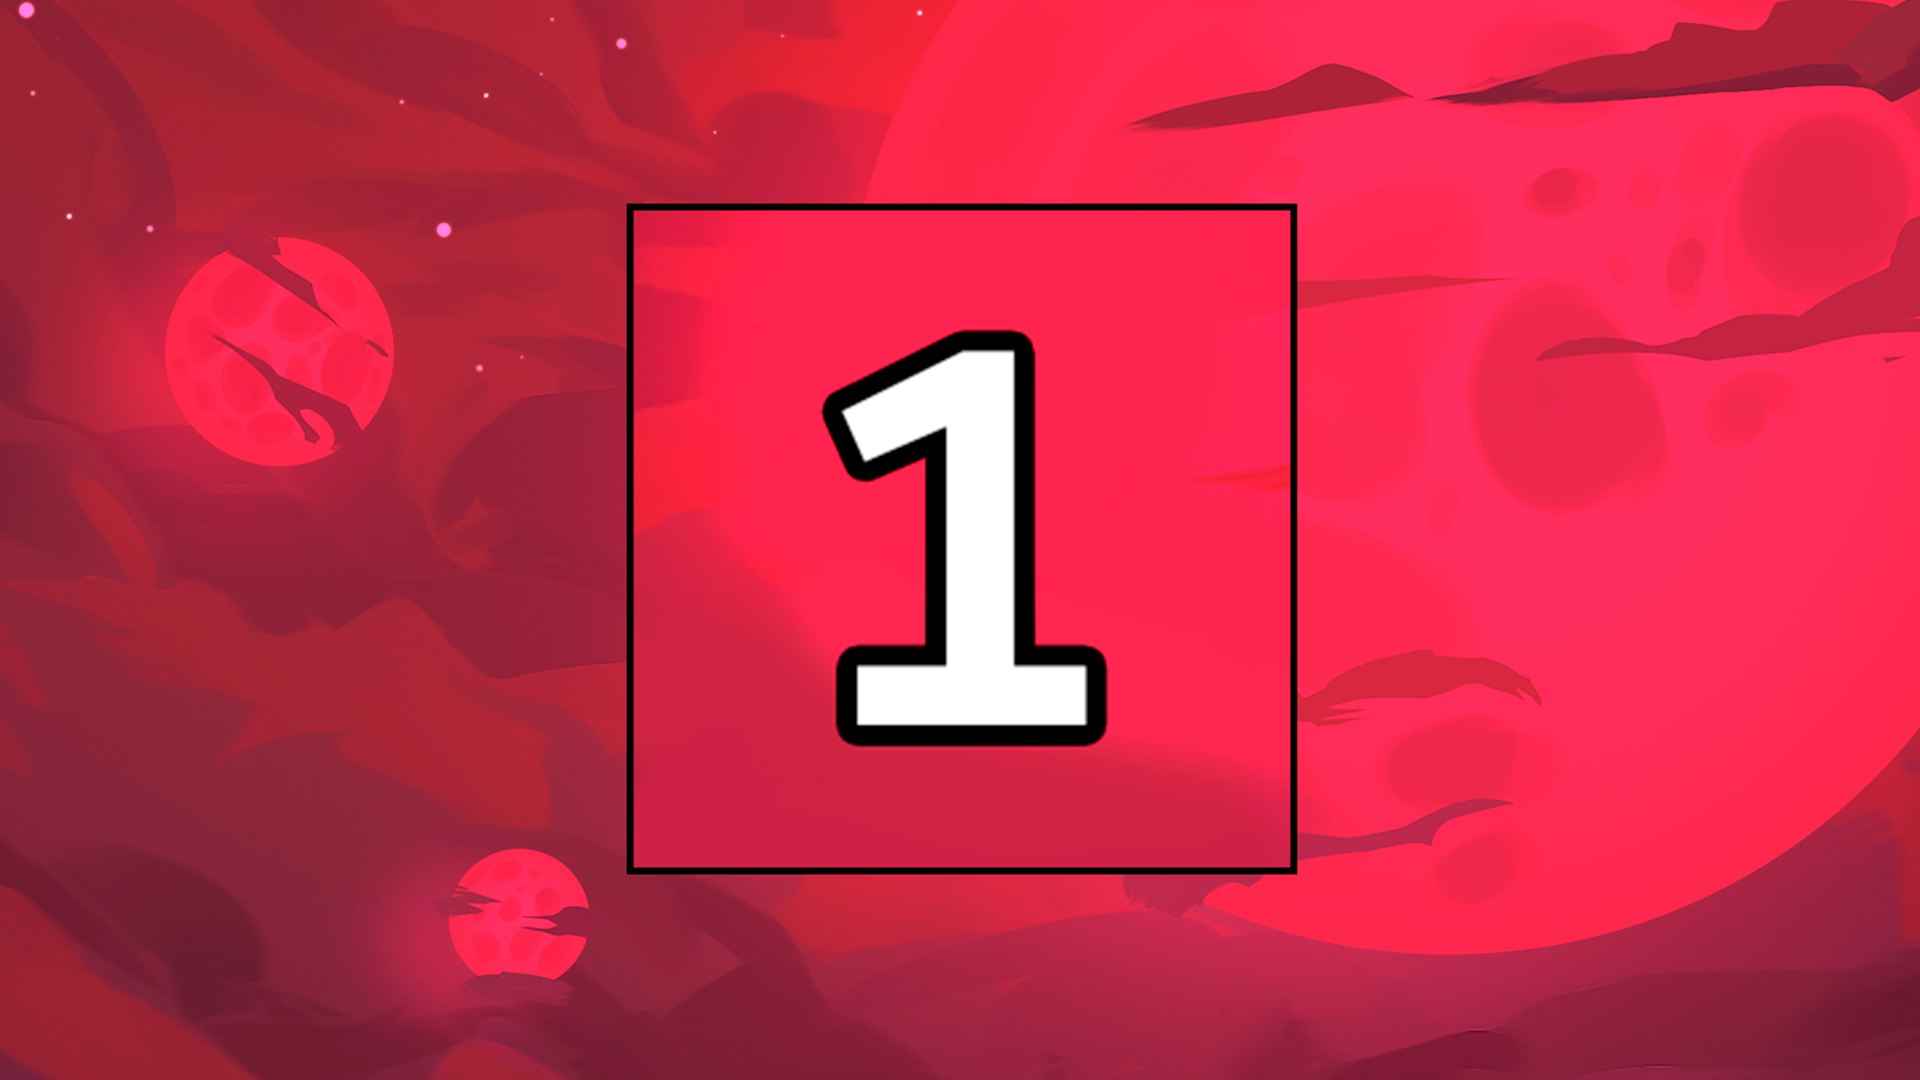 Icon for Level 1